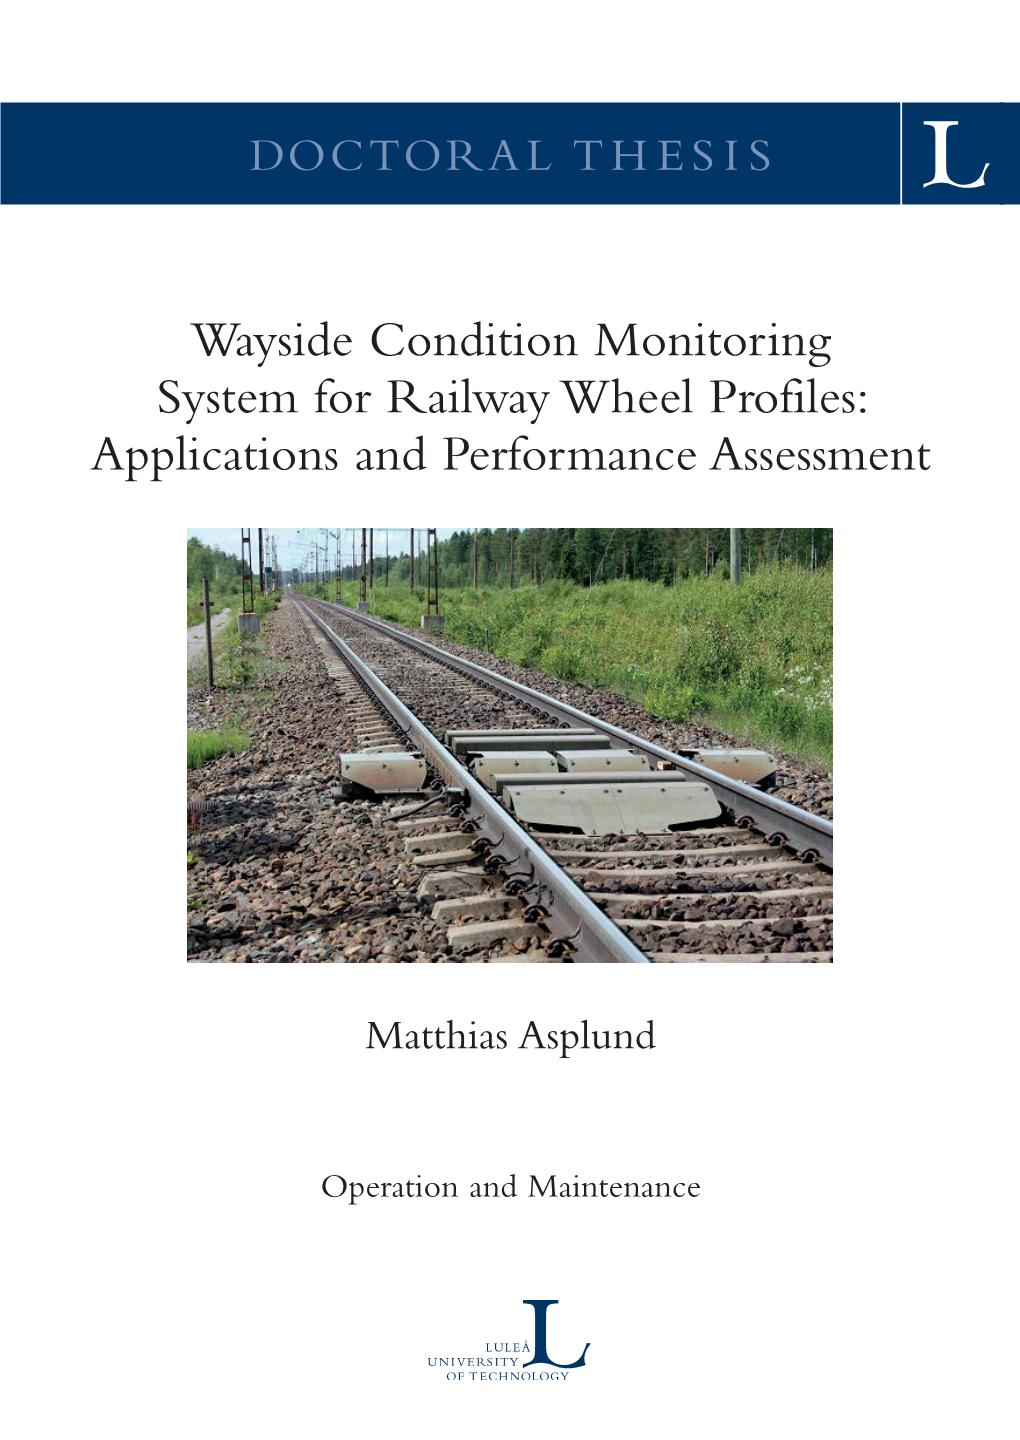 Wayside Condition Monitoring System for Railway Wheel Profiles: Applications and Performance Assessment